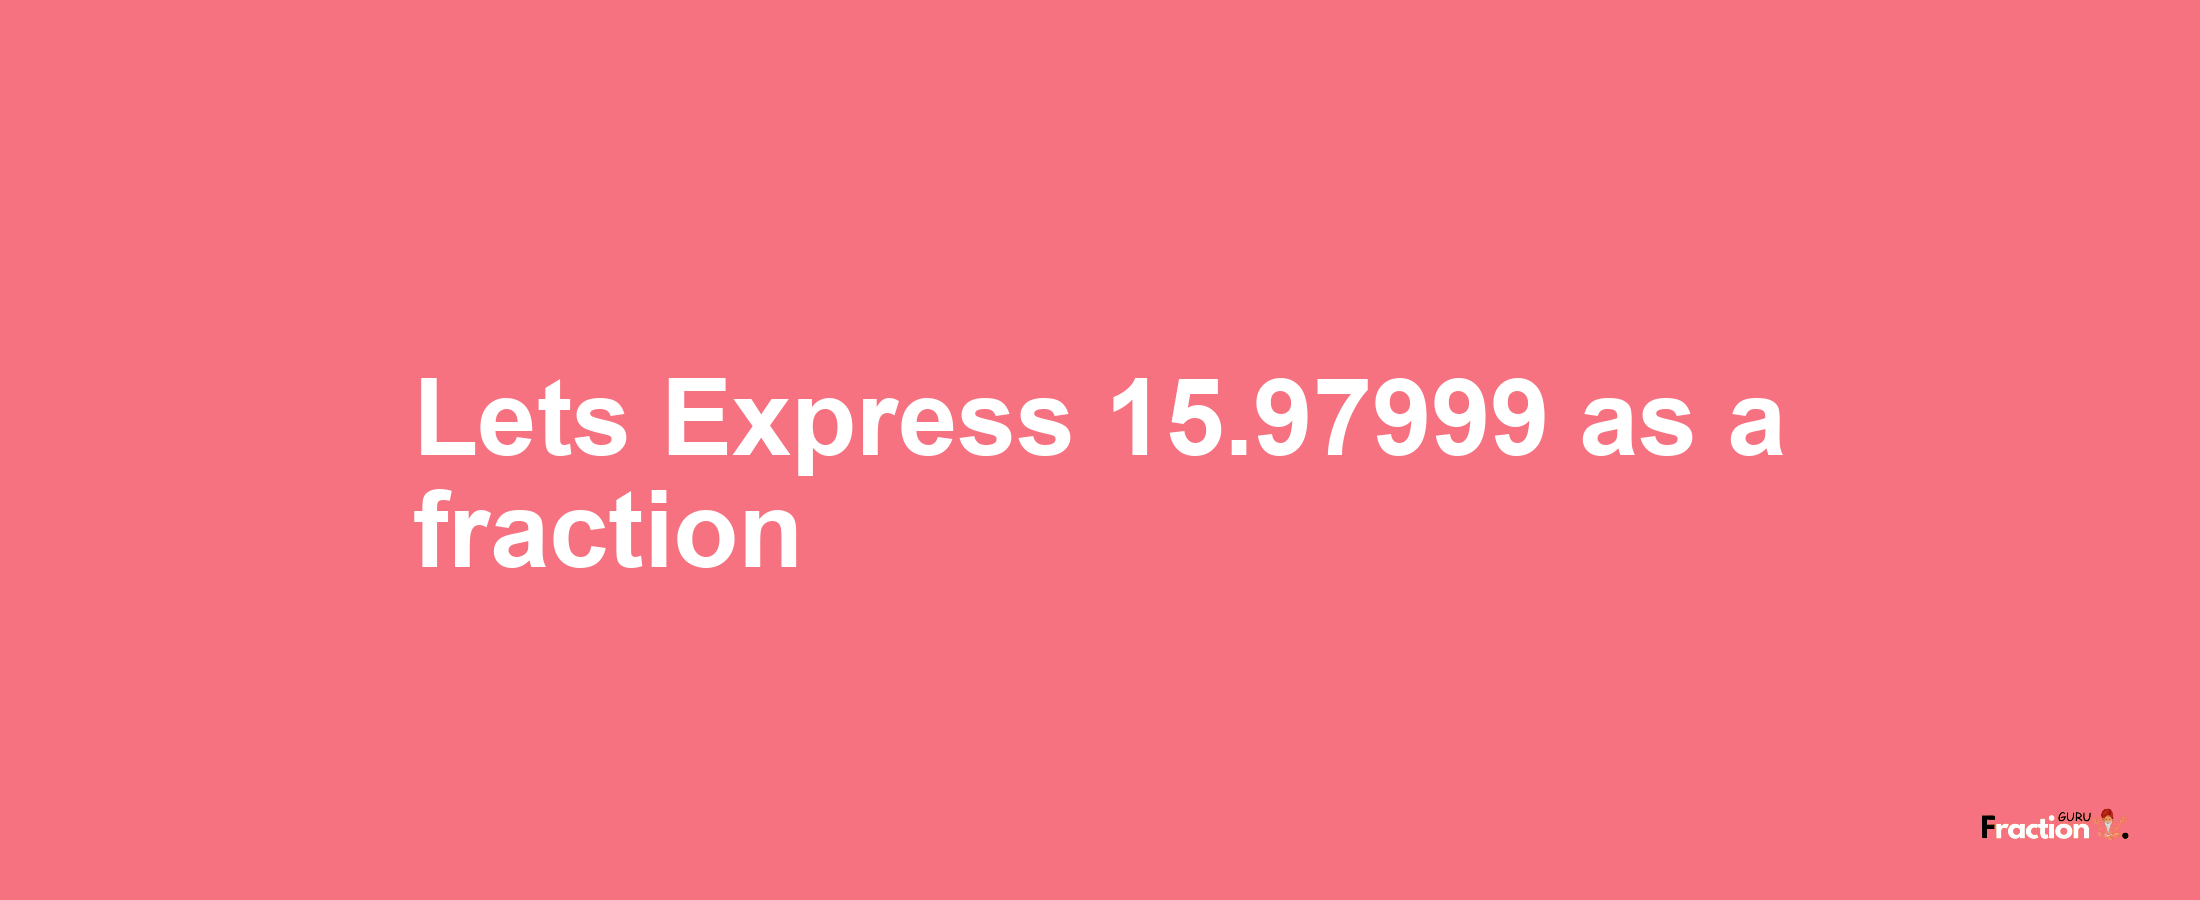 Lets Express 15.97999 as afraction